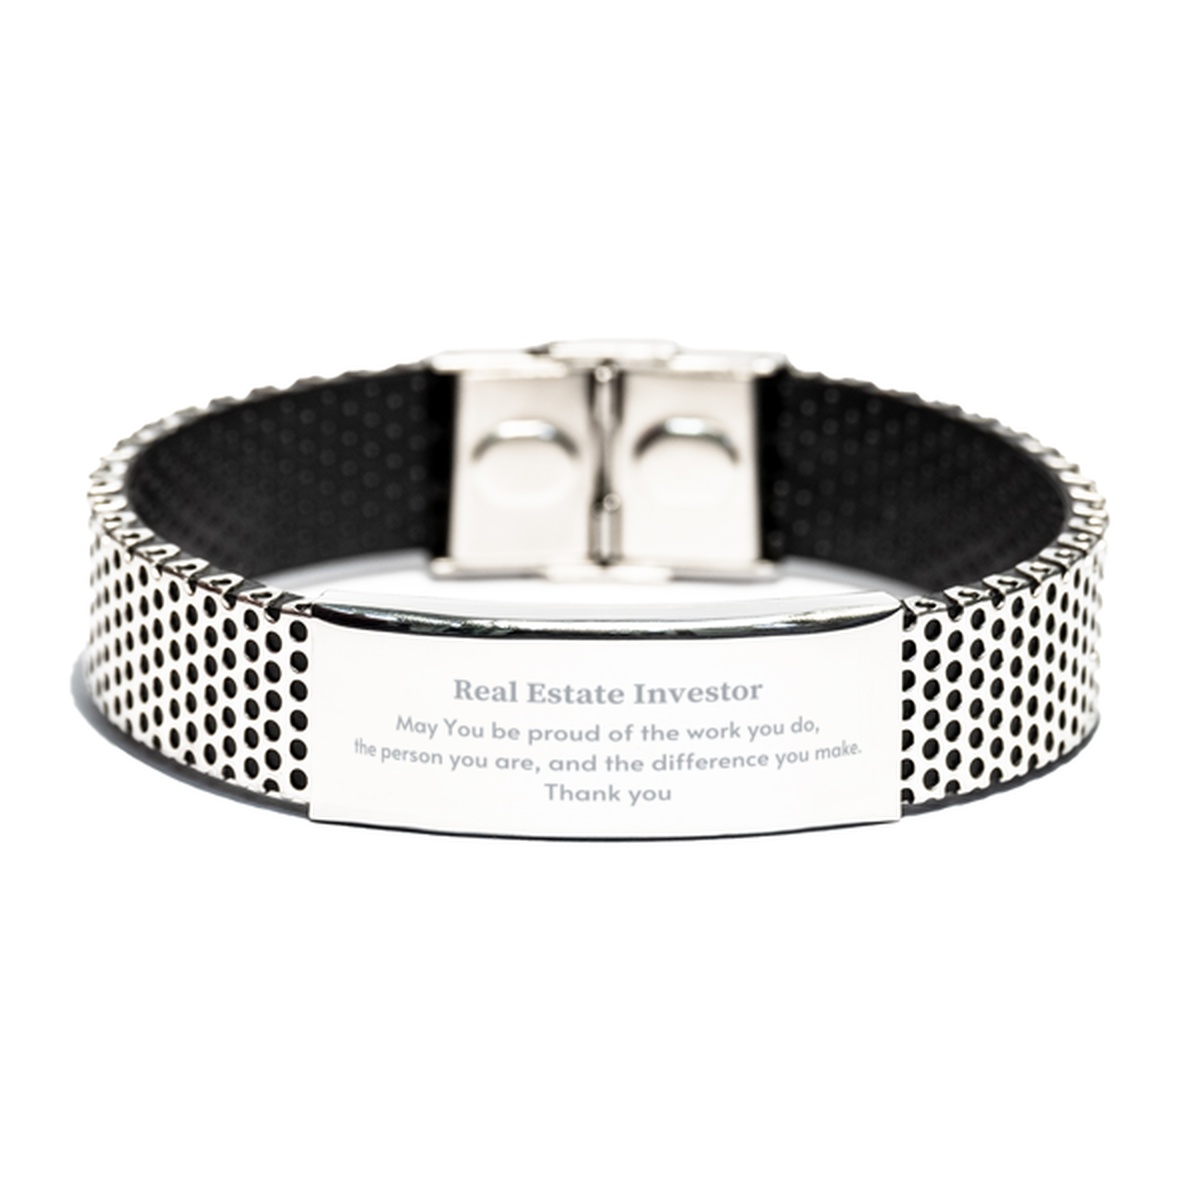 Heartwarming Stainless Steel Bracelet Retirement Coworkers Gifts for Real Estate Investor, Real Estate Investor May You be proud of the work you do, the person you are Gifts for Boss Men Women Friends